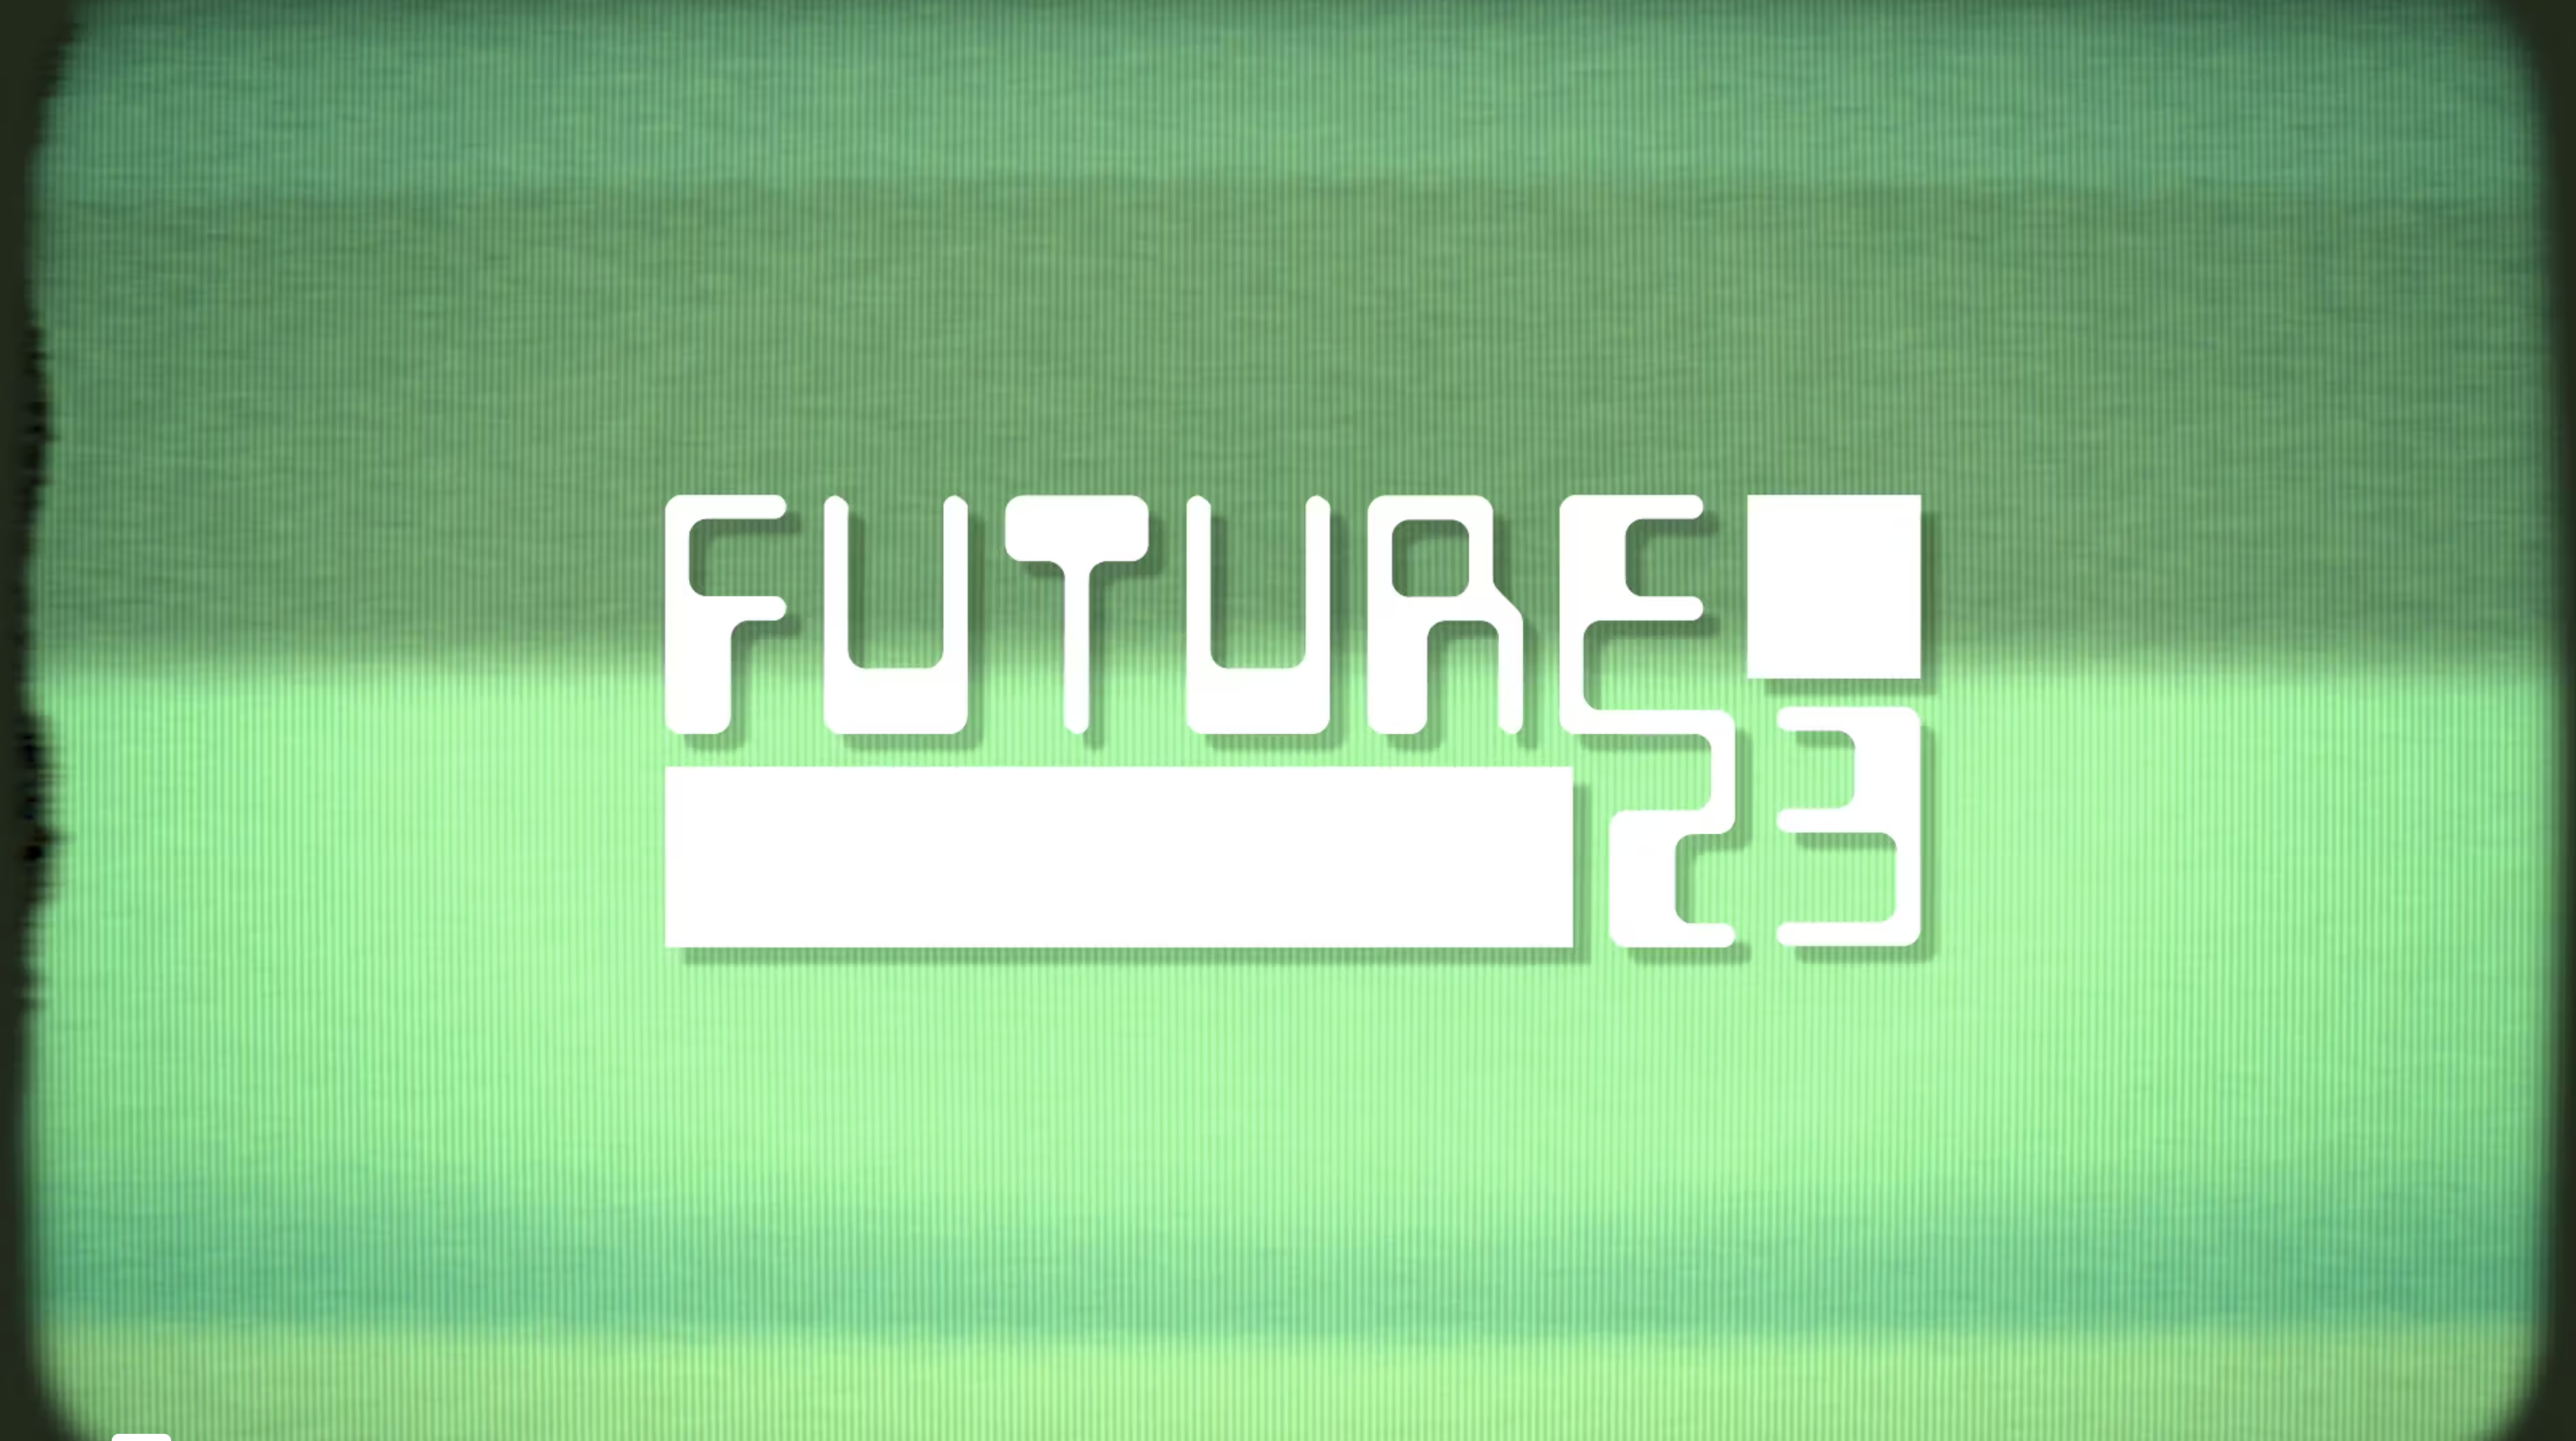 Future23 logo against green static background